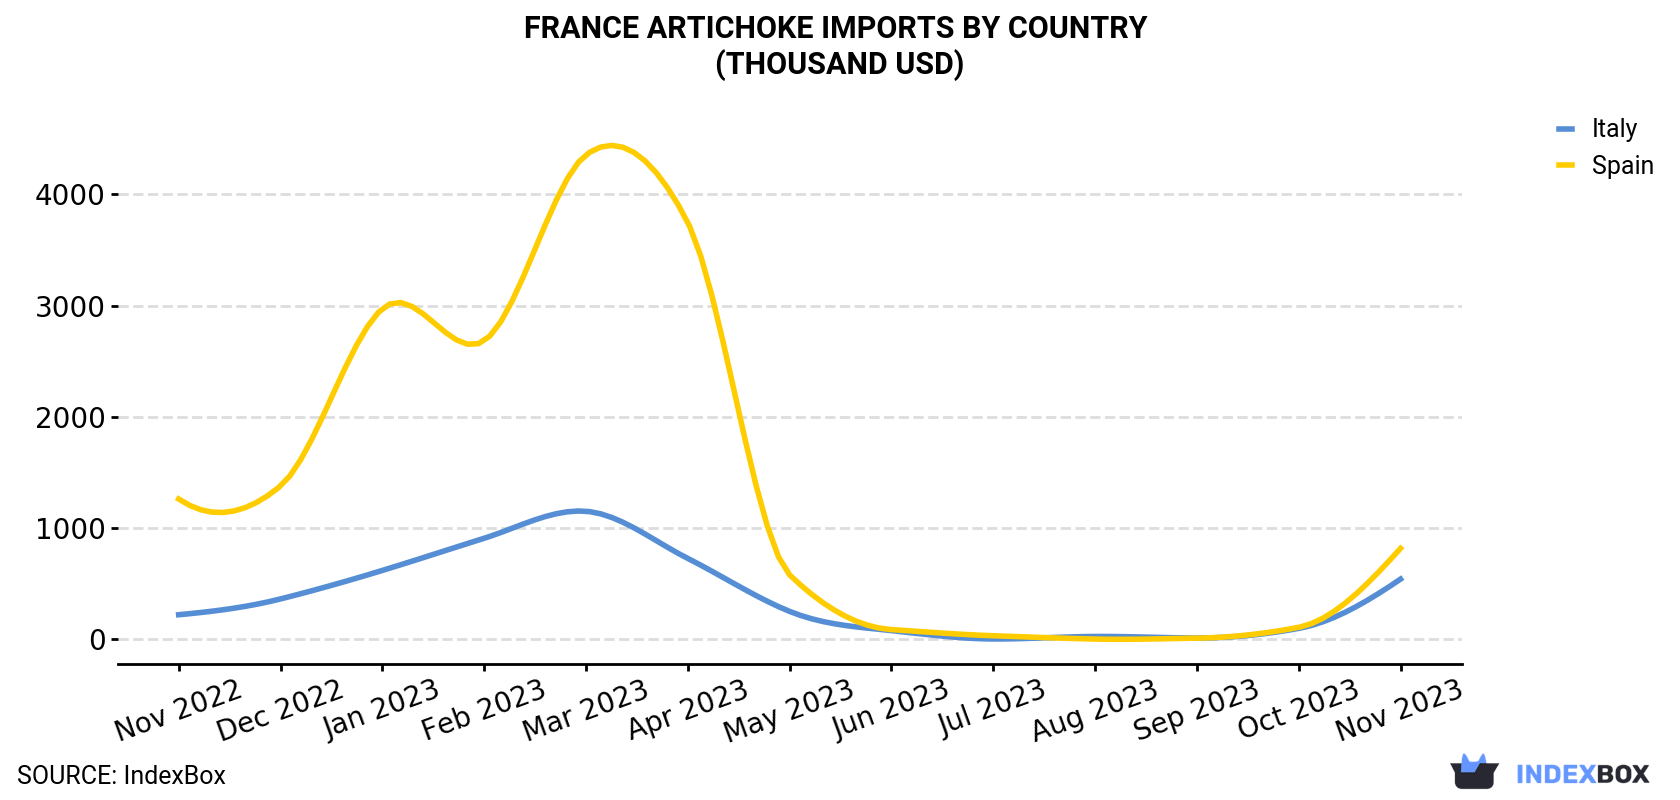 France Artichoke Imports By Country (Thousand USD)